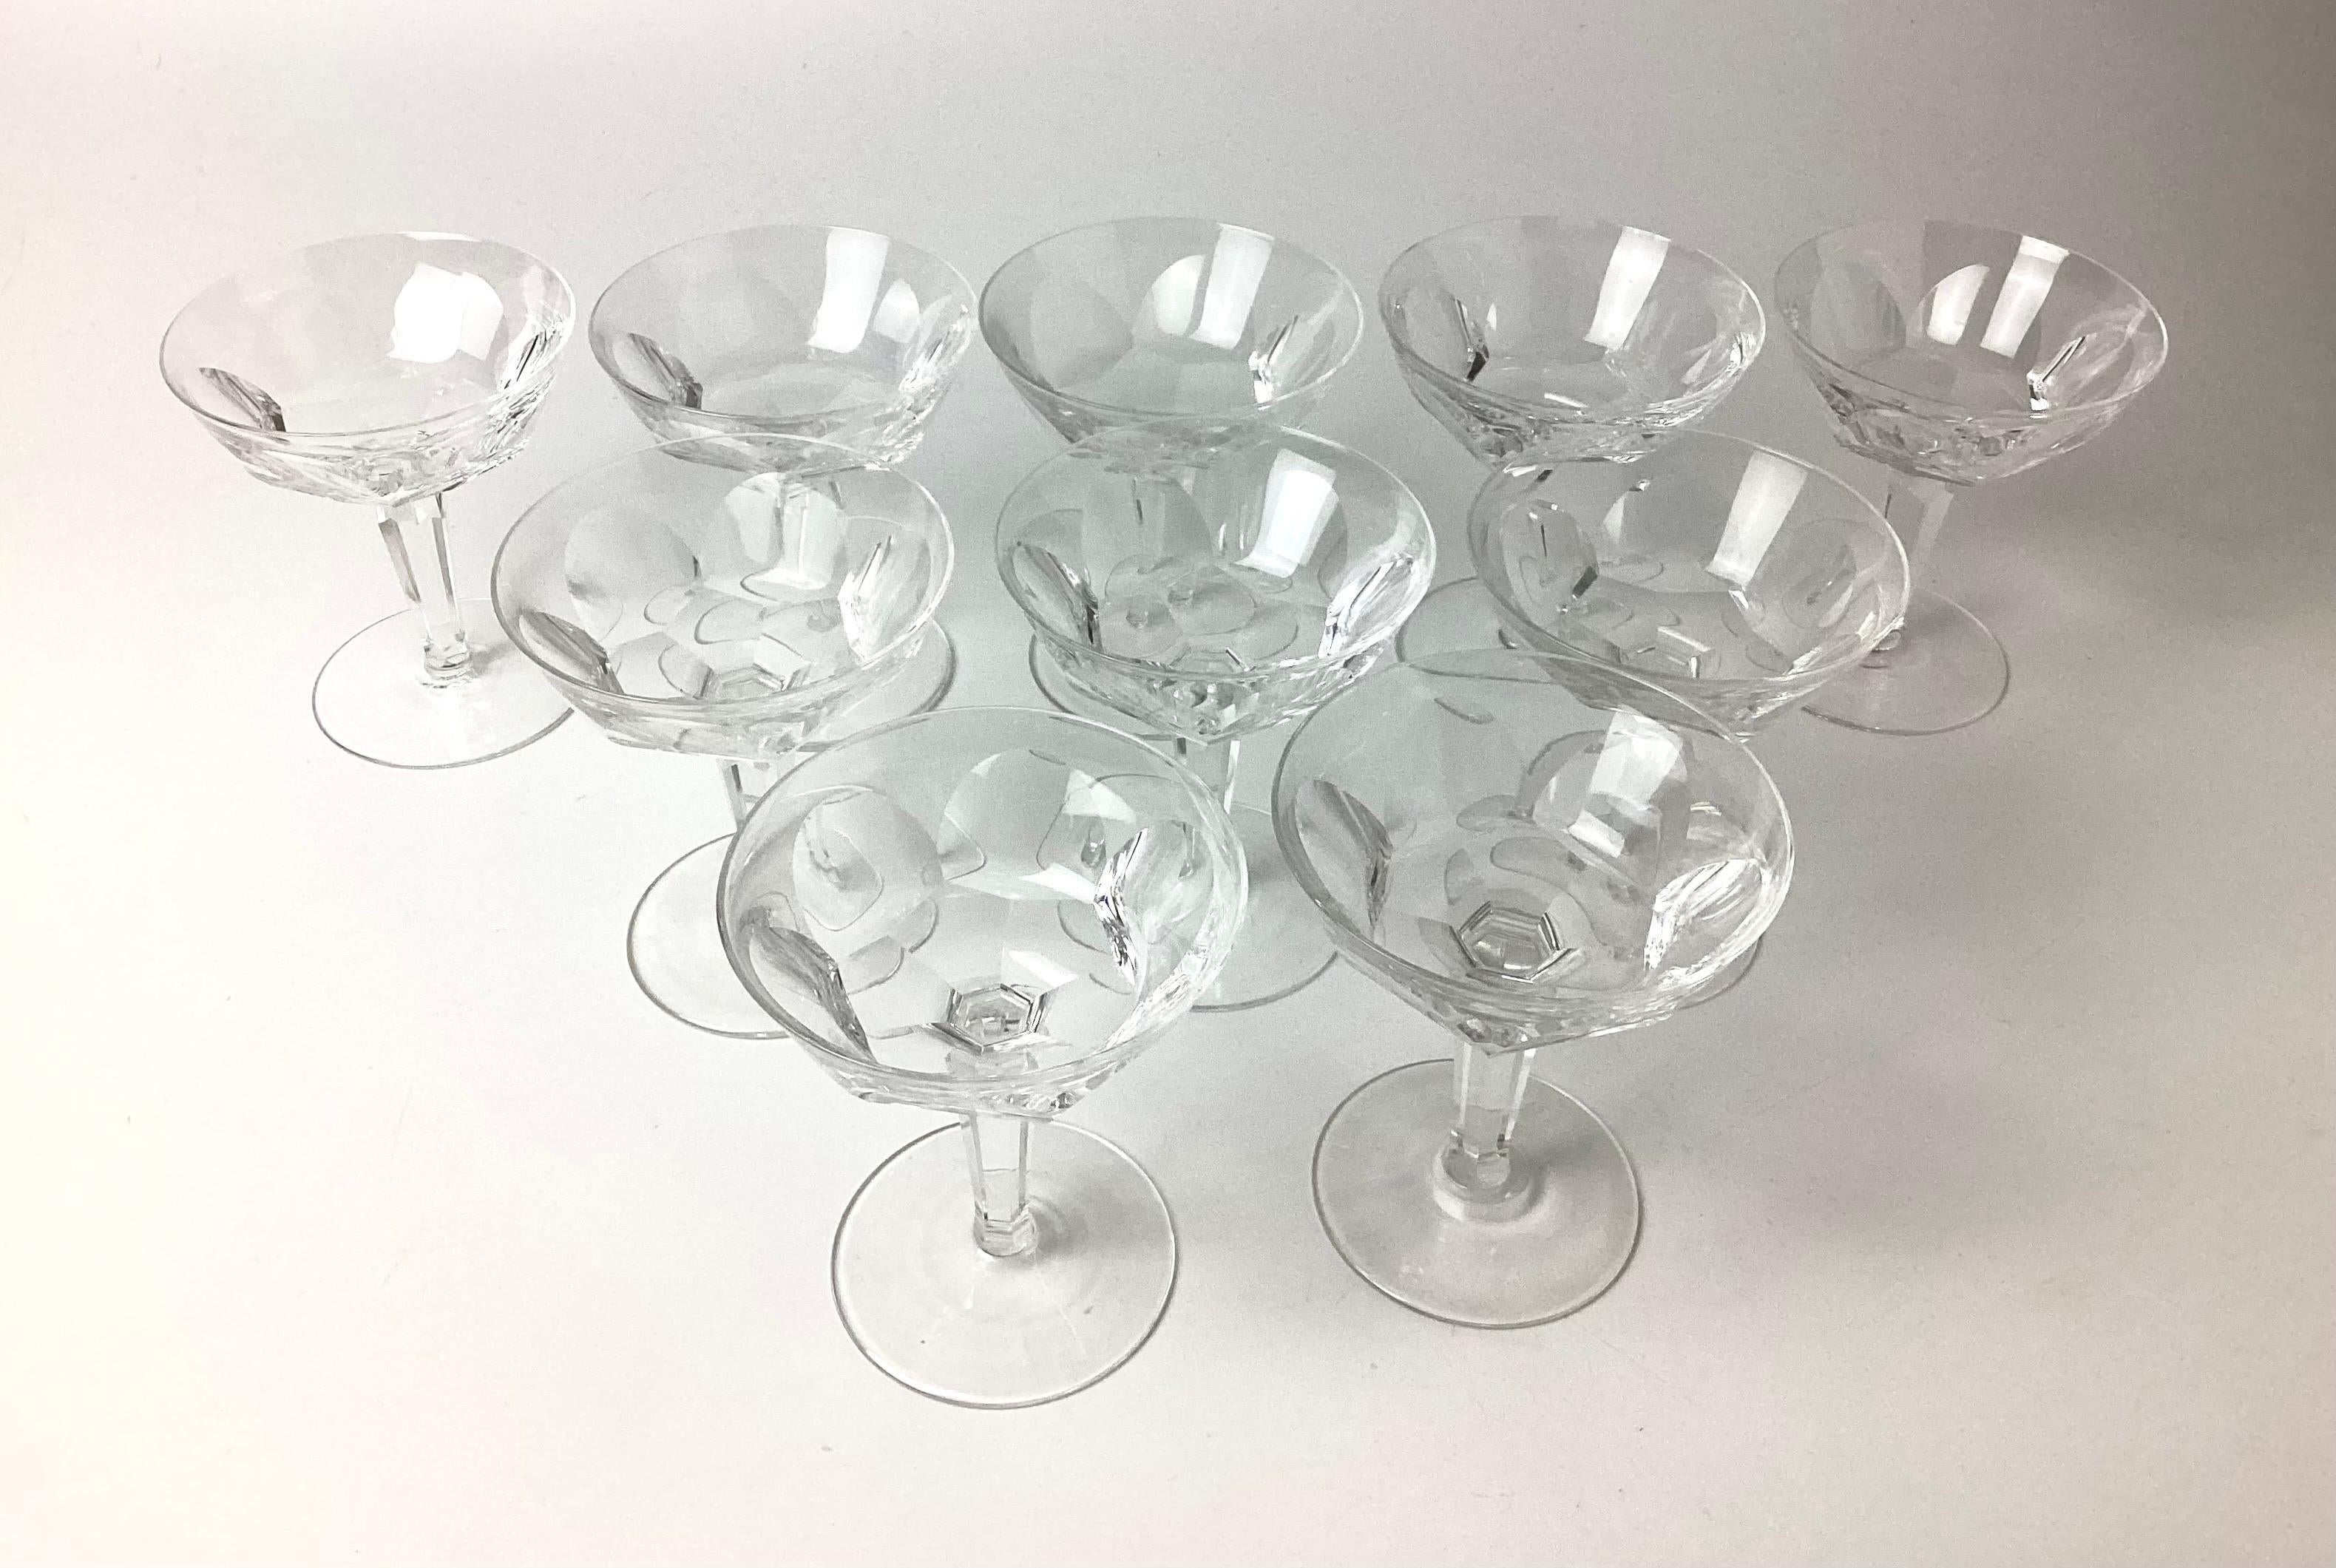 Set of 10 Waterford Sheila cut champagne or tall Sherbet. This pattern has been discontinued. Made from 1958 - 2017. ^cut panels with a multisided stem. Marked with the Waterford mark on the bottoms.